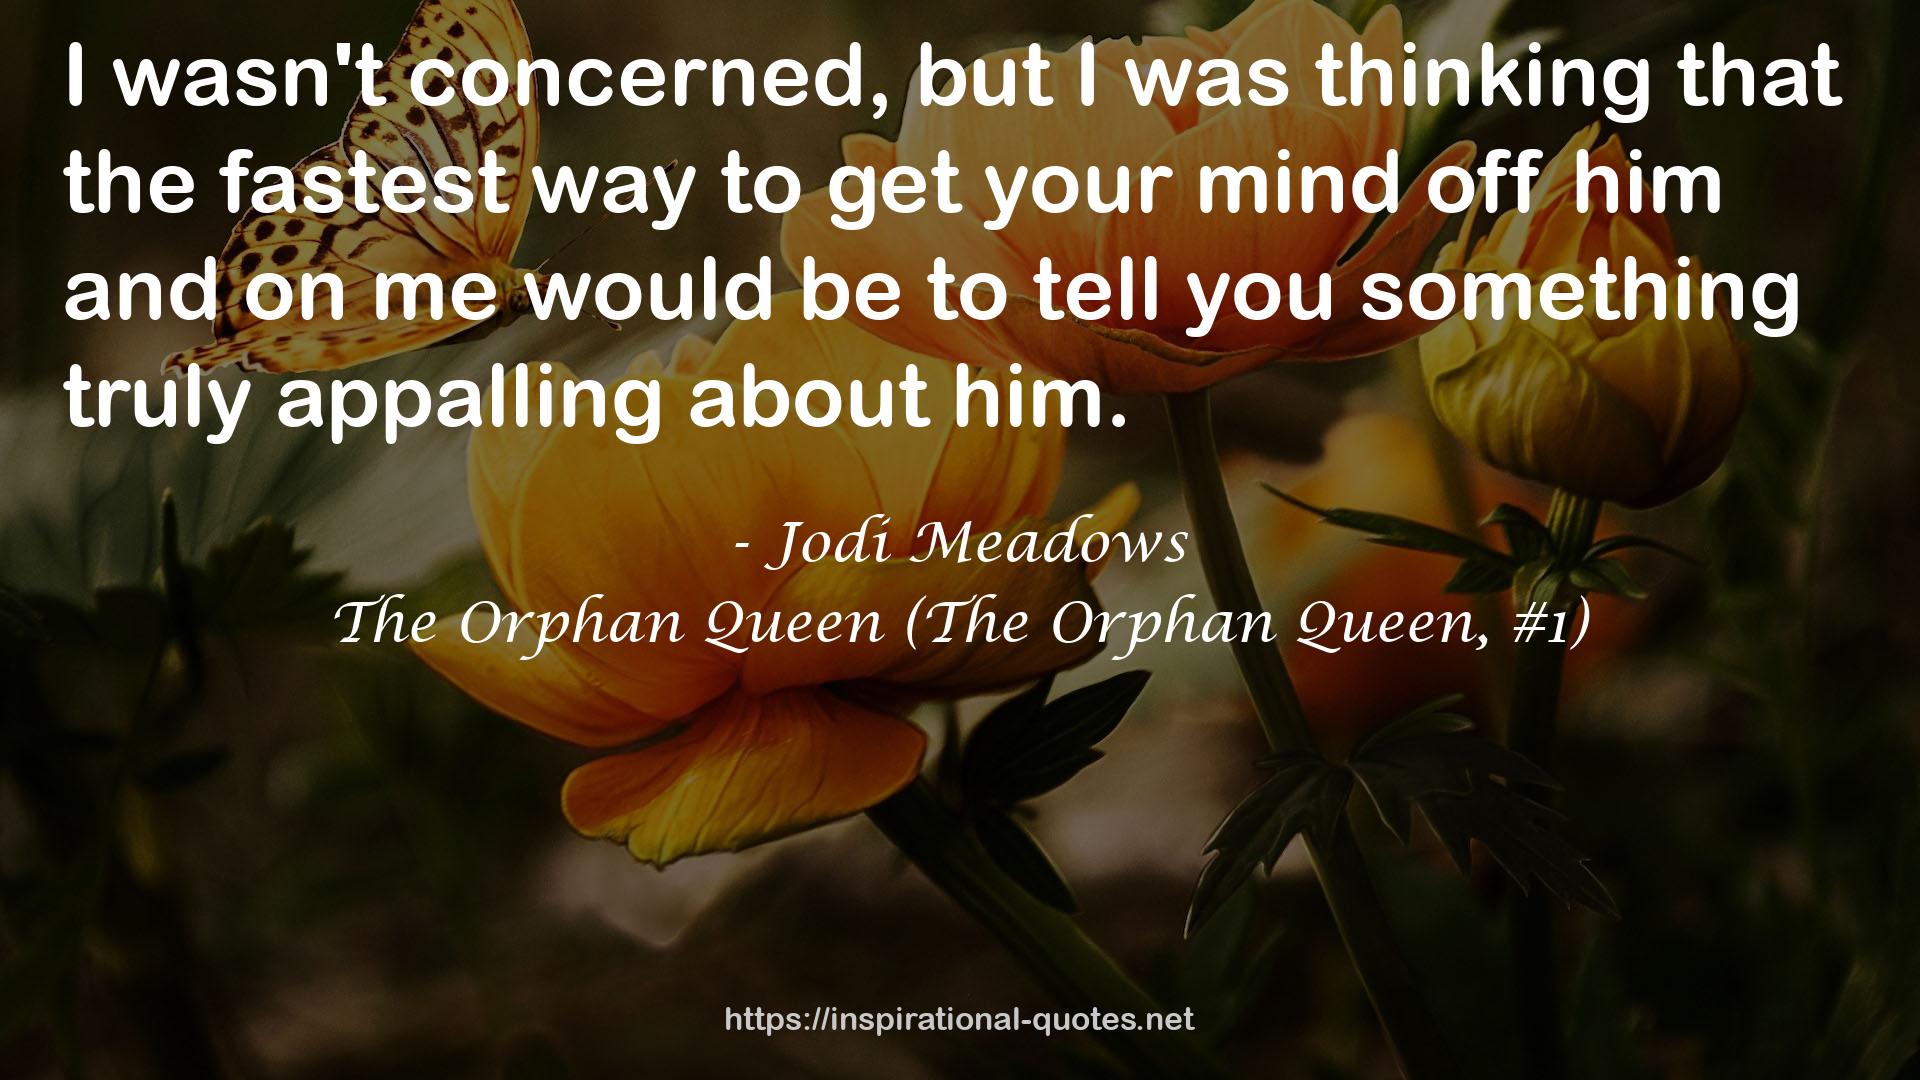 The Orphan Queen (The Orphan Queen, #1) QUOTES